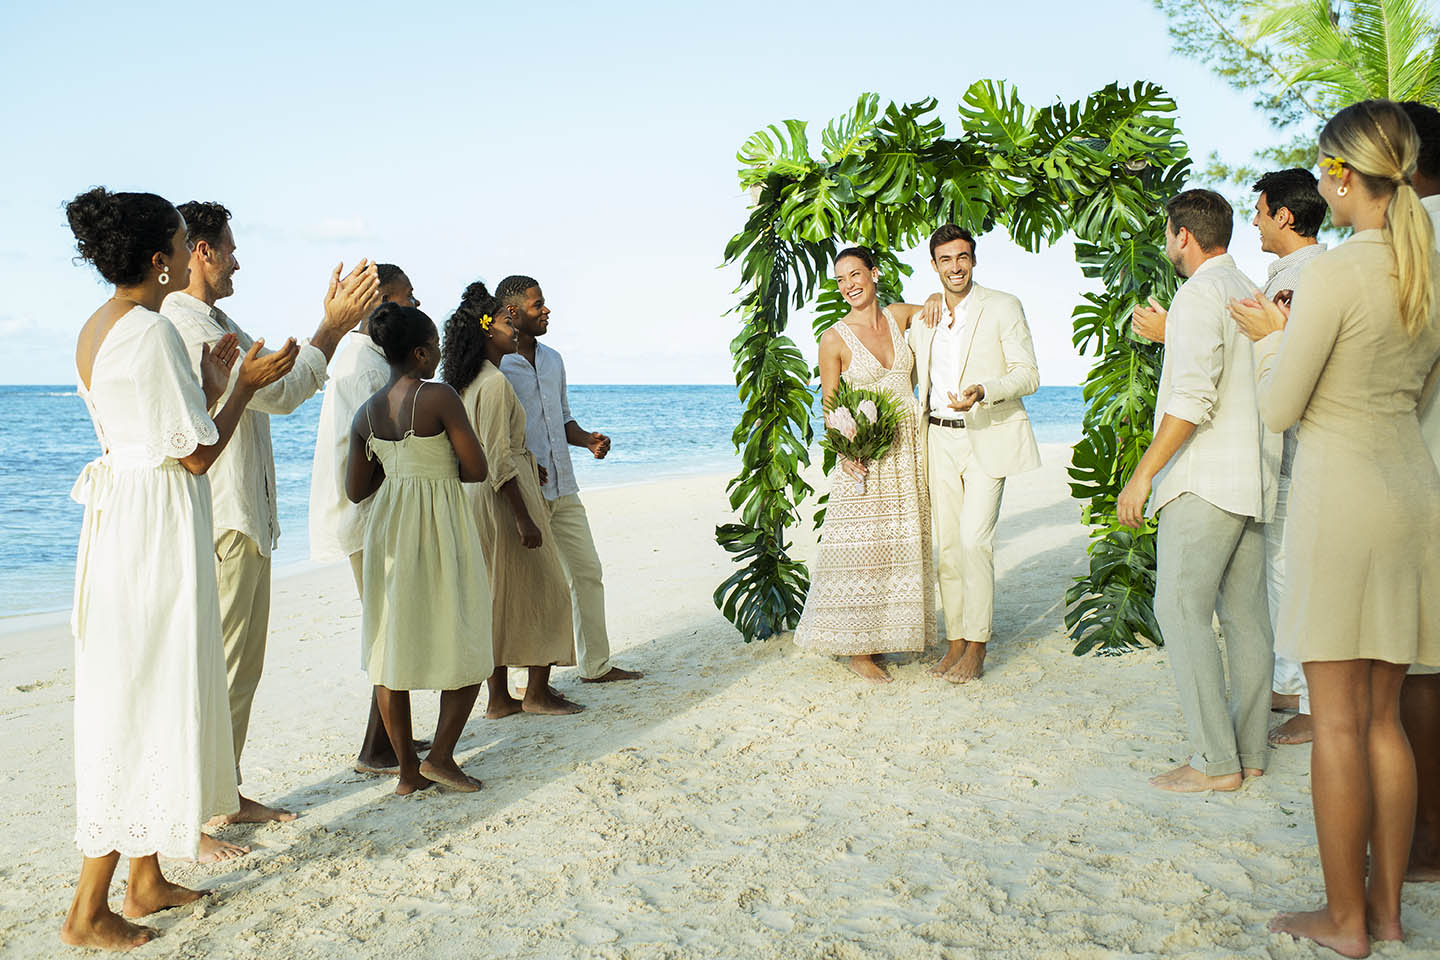 Ways to Organize Your Wedding in Jamaica And Make it Feel More Caribbean